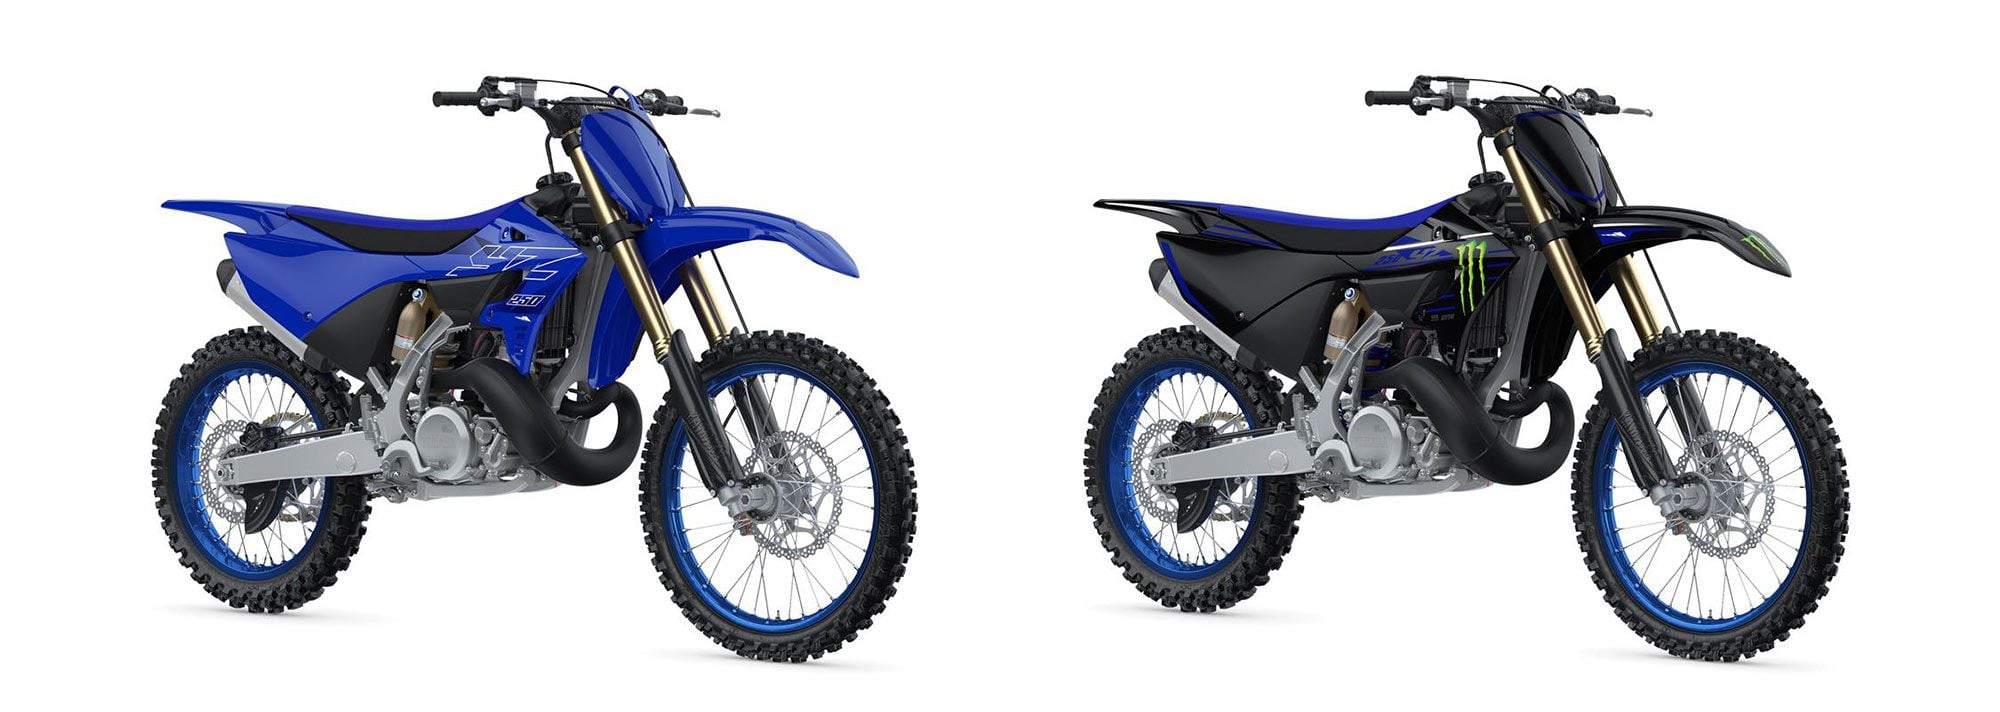 While these two YZ250s are mechanically identical, the Monster Energy Yamaha Racing Edition (right) offers a more factory race team appearance with different plastic color and graphics compared to the YZ250 in Team Yamaha Blue (left).